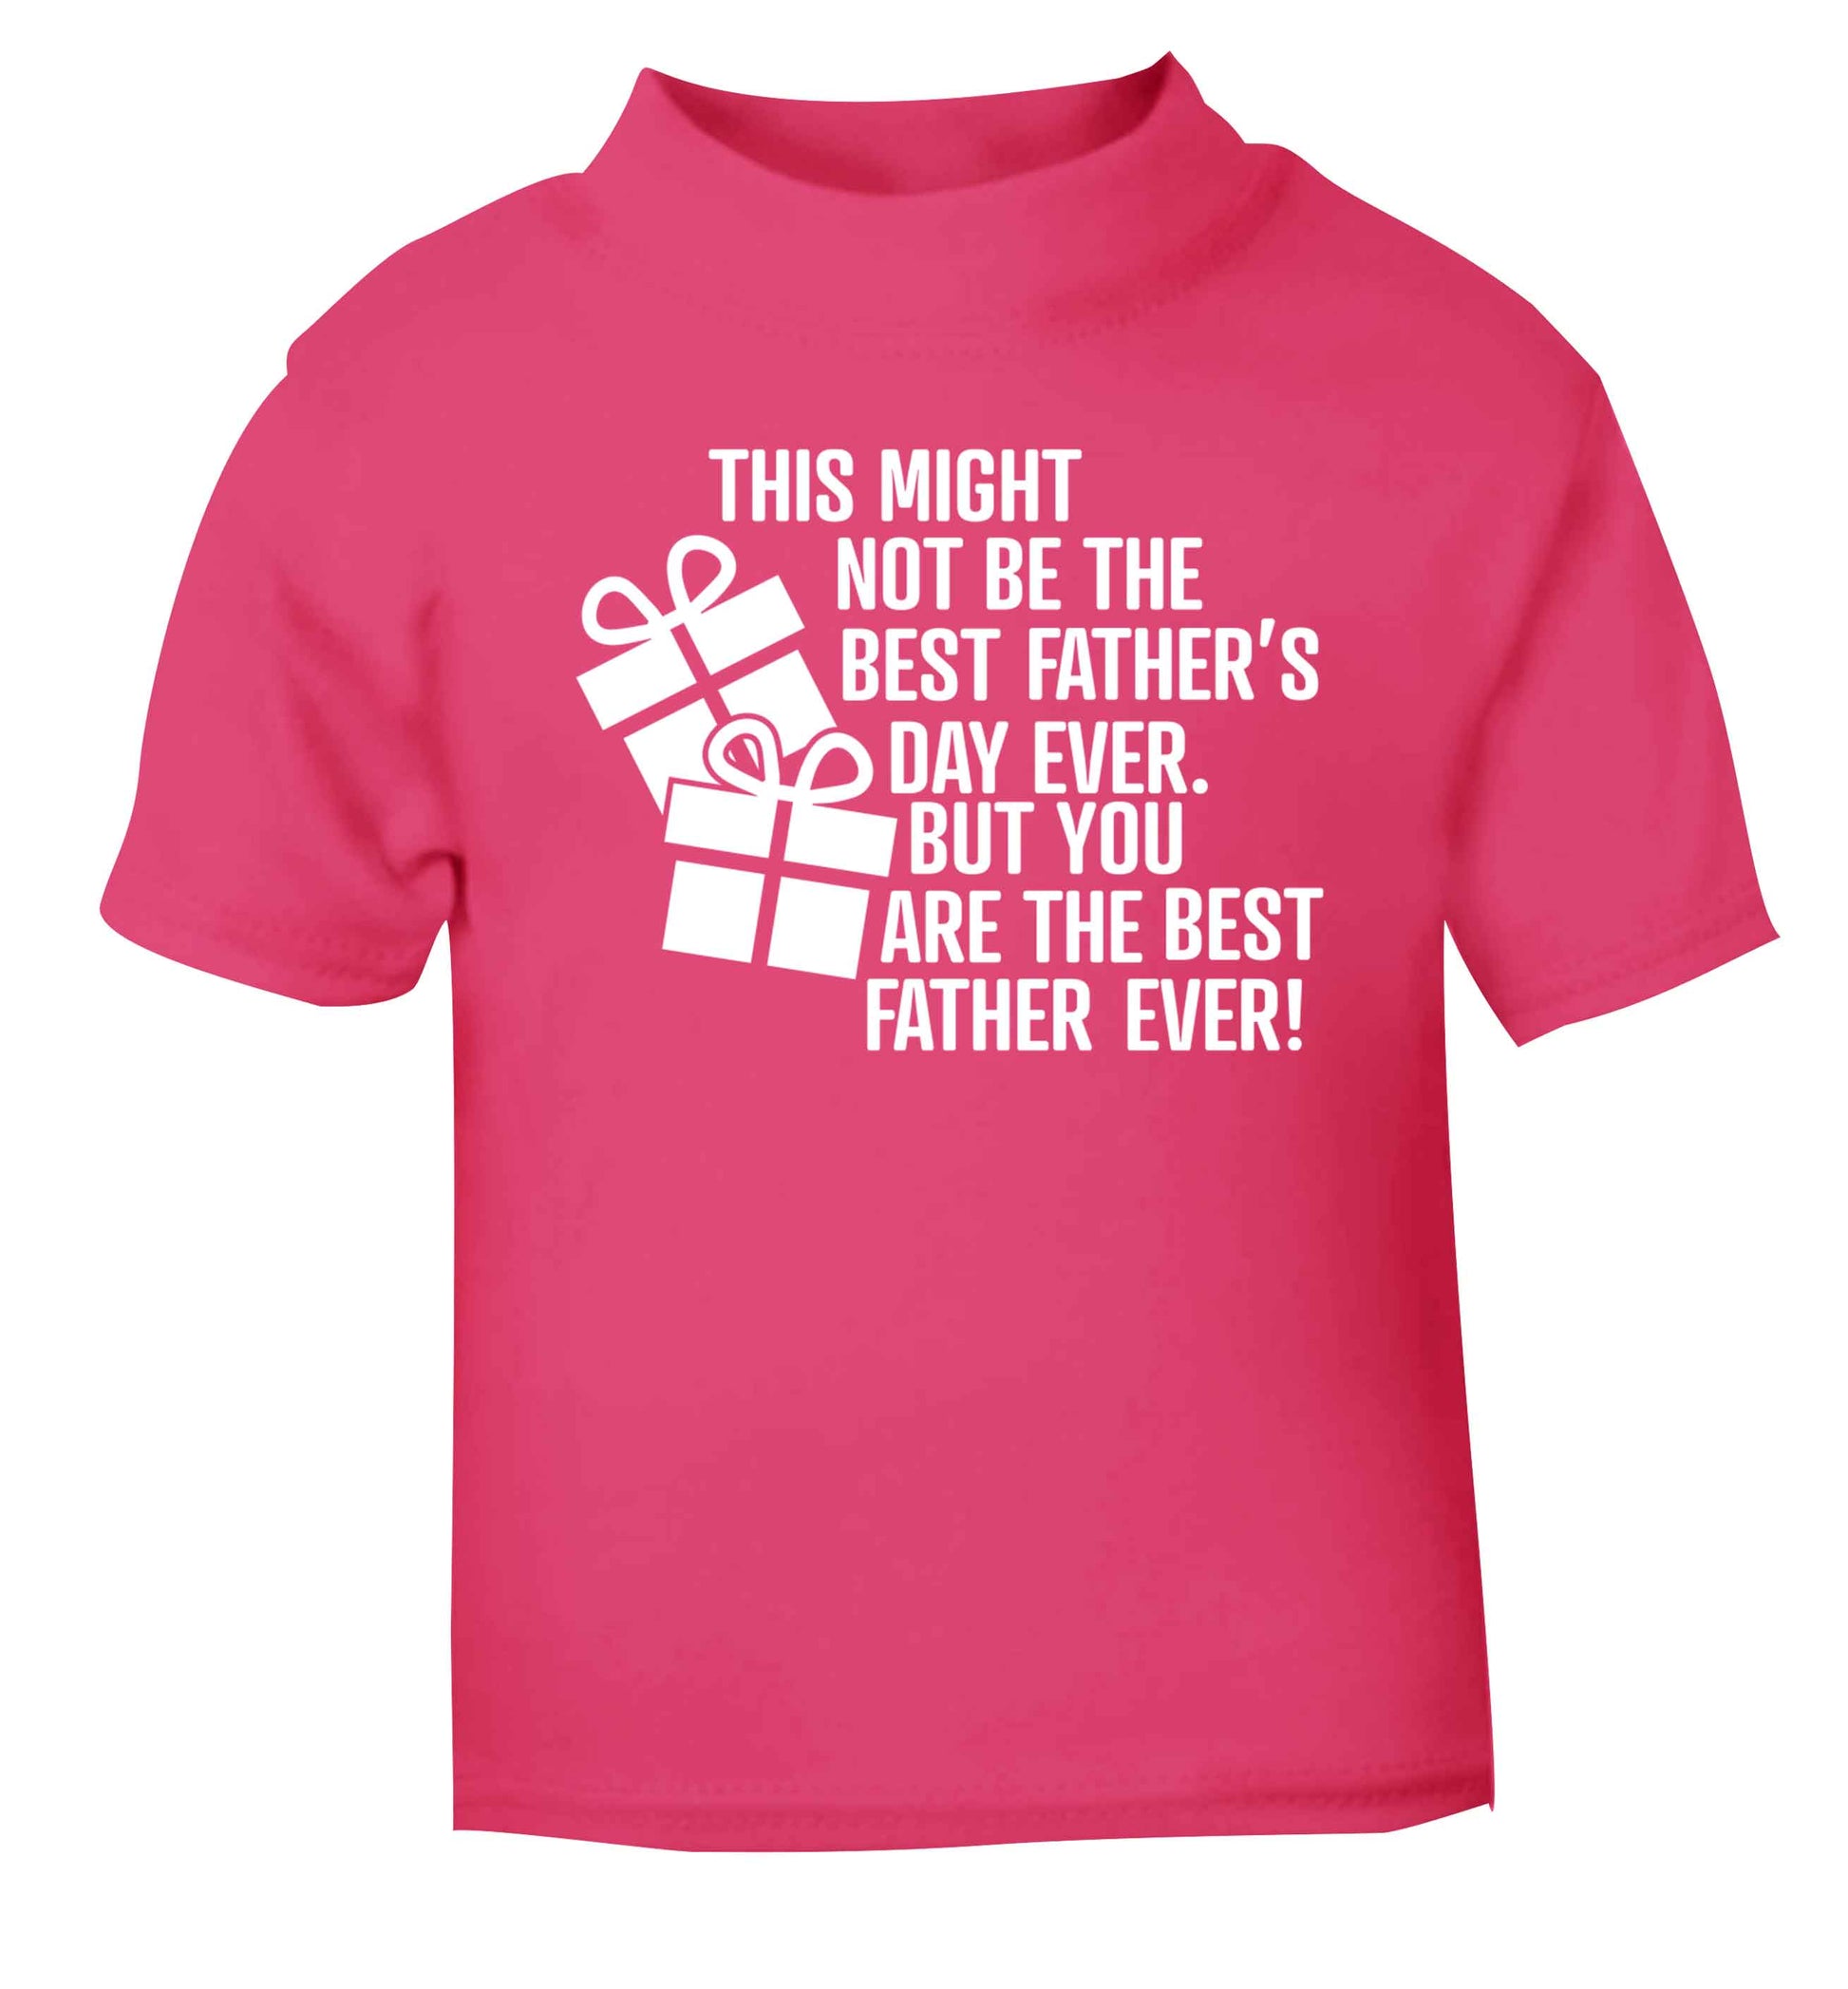 It might not be the best Father's Day ever but you are the best father ever! pink baby toddler Tshirt 2 Years